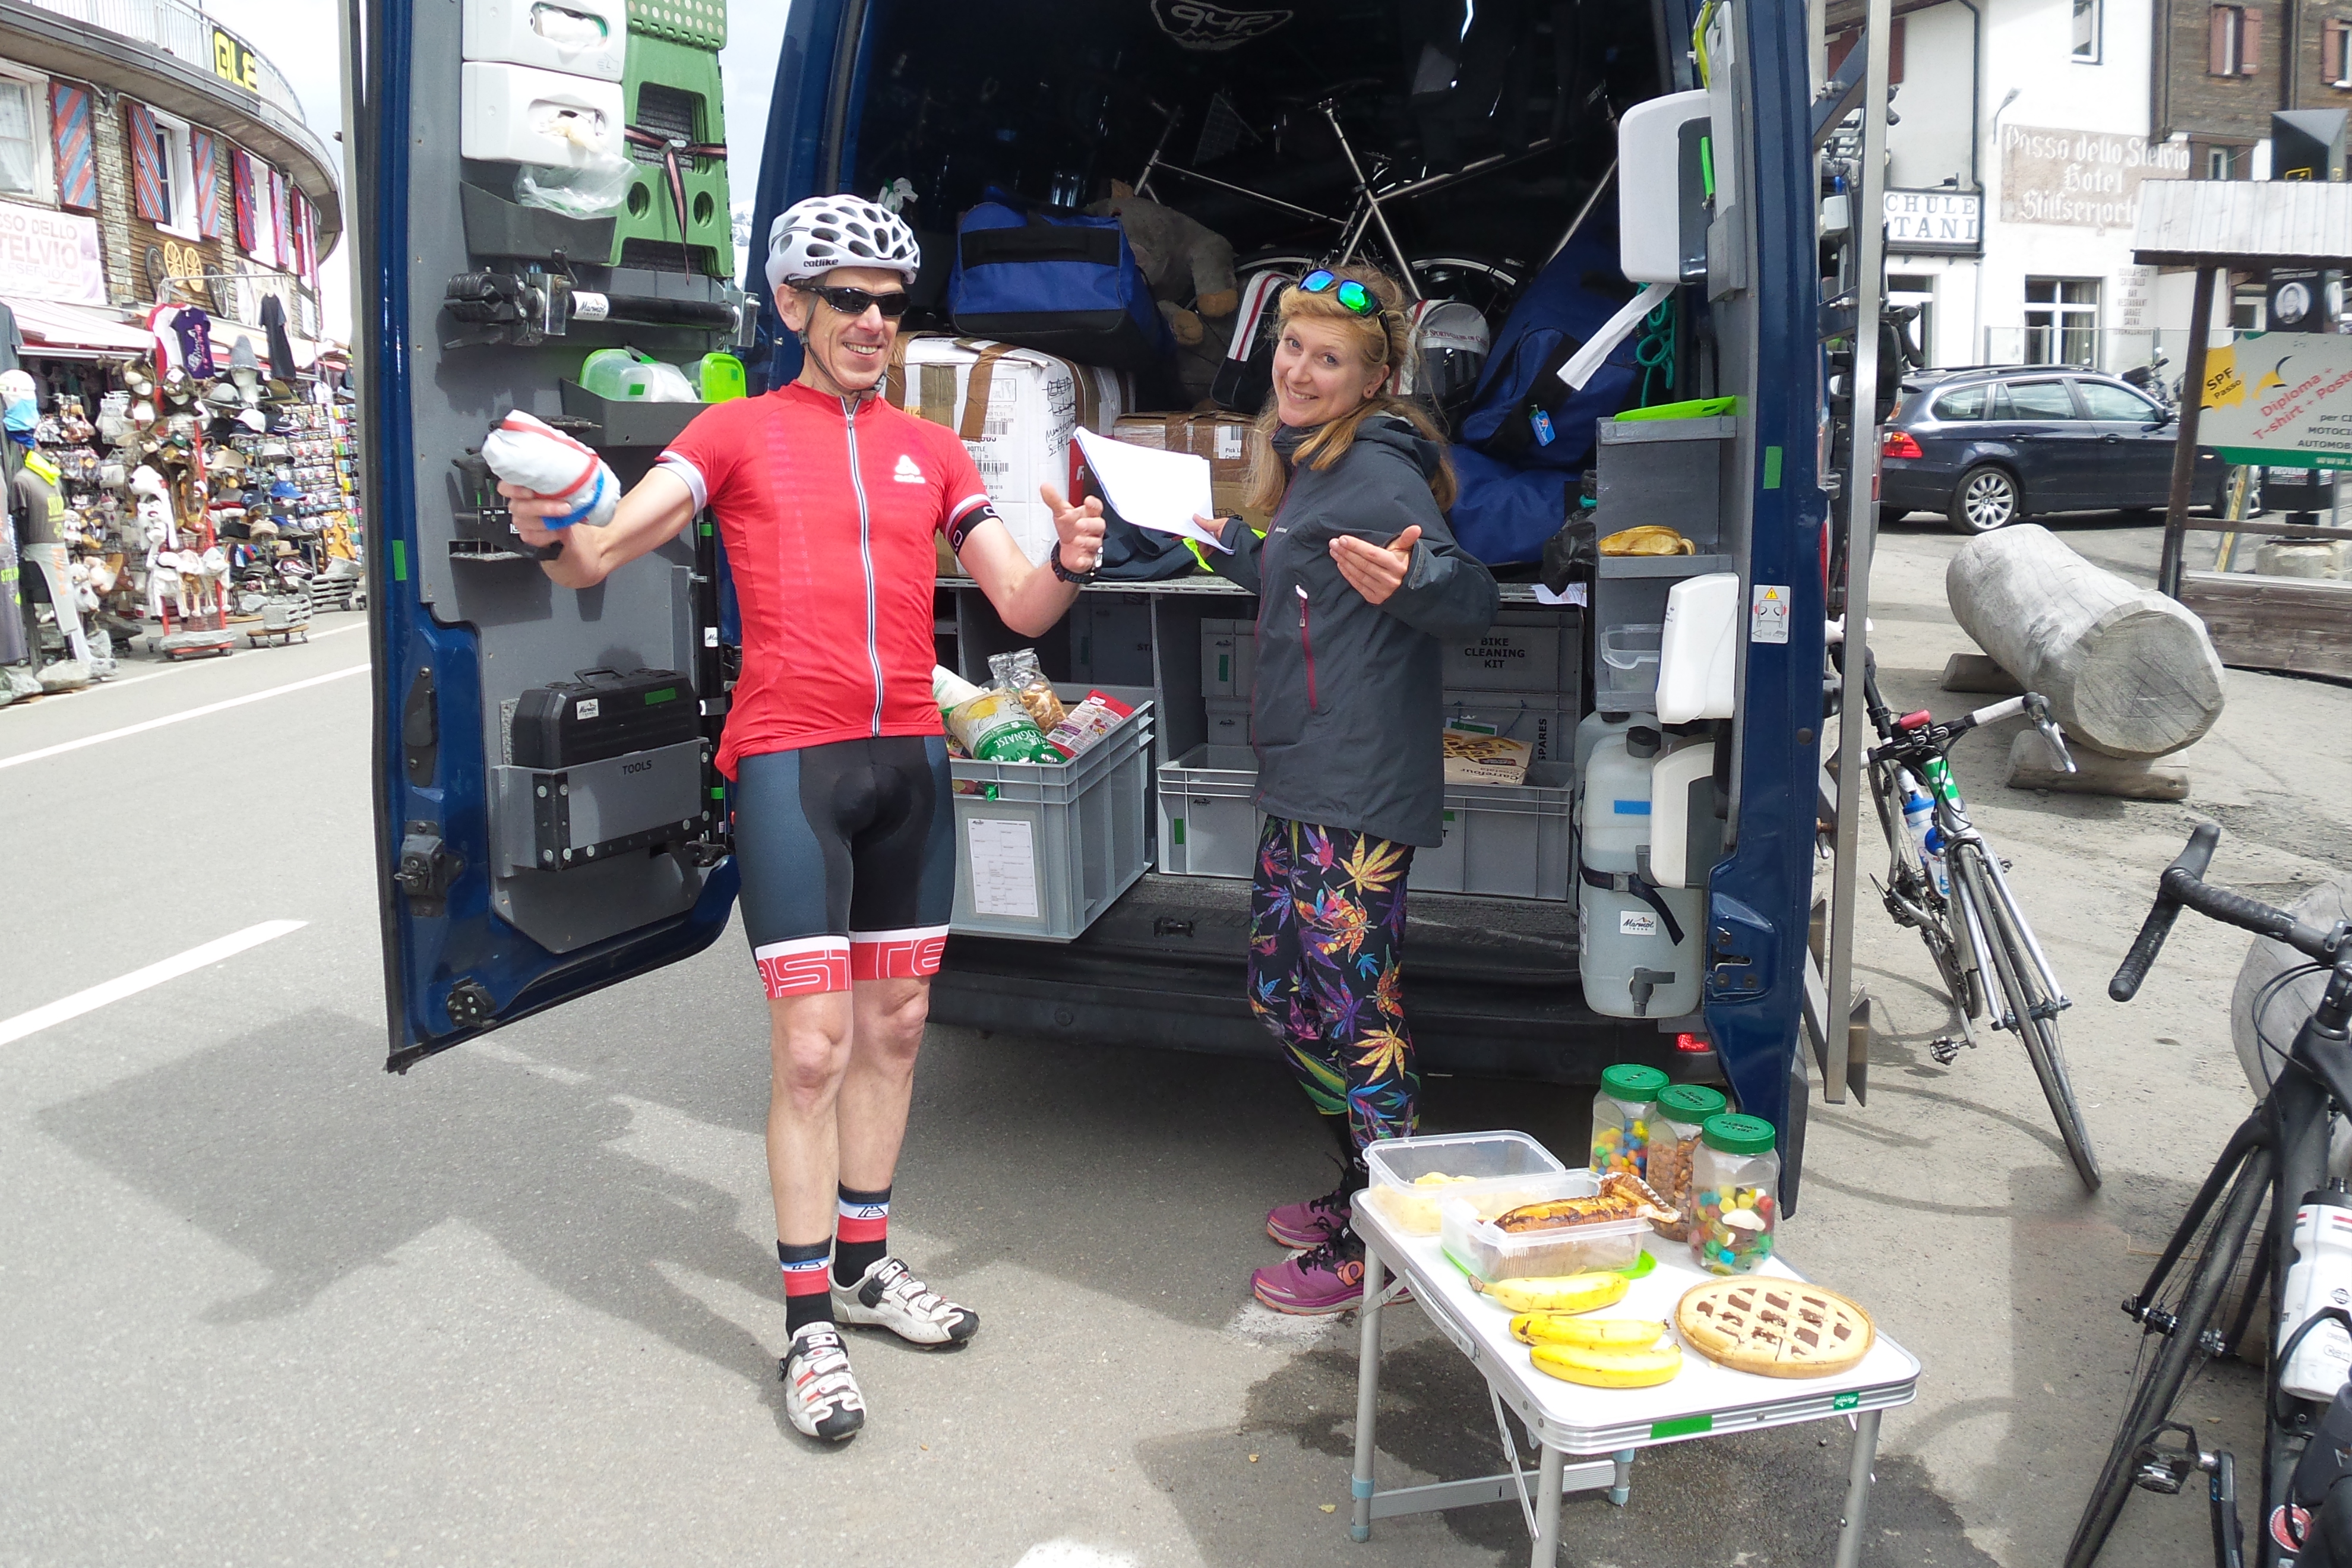 Marmot Tours staff support our riders with food, water, and moral support